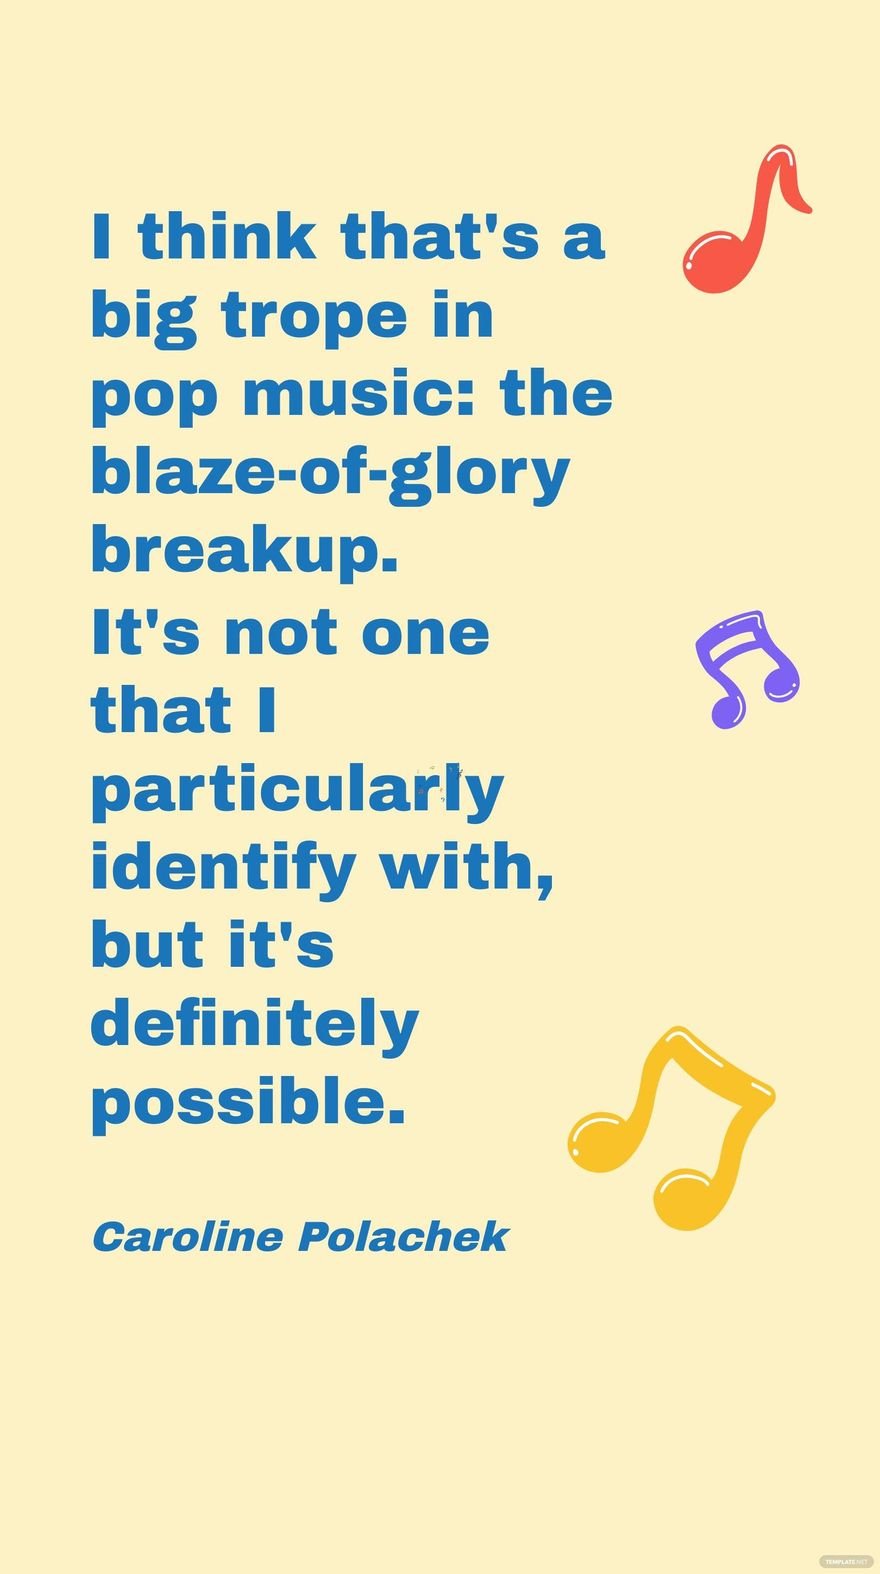 Free Caroline Polachek - I think that's a big trope in pop music: the blaze-of-glory breakup. It's not one that I particularly identify with, but it's definitely possible.